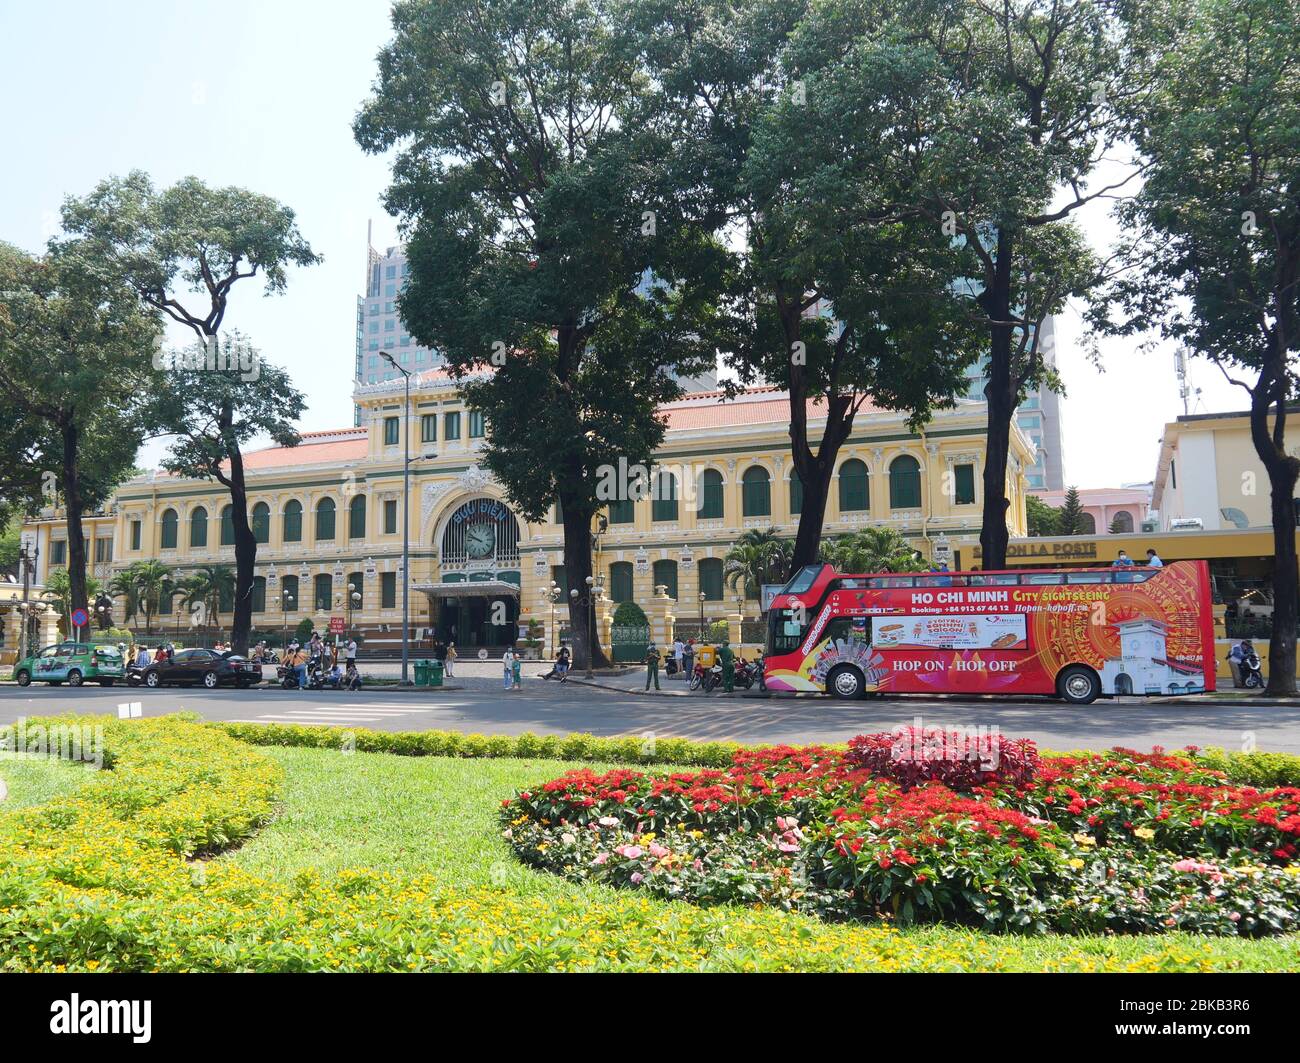 Ho Chi Minh City, Vietnam - April 30, 2020: Central Post Office in Ho Chi Minh city, a popular tourist attraction Stock Photo